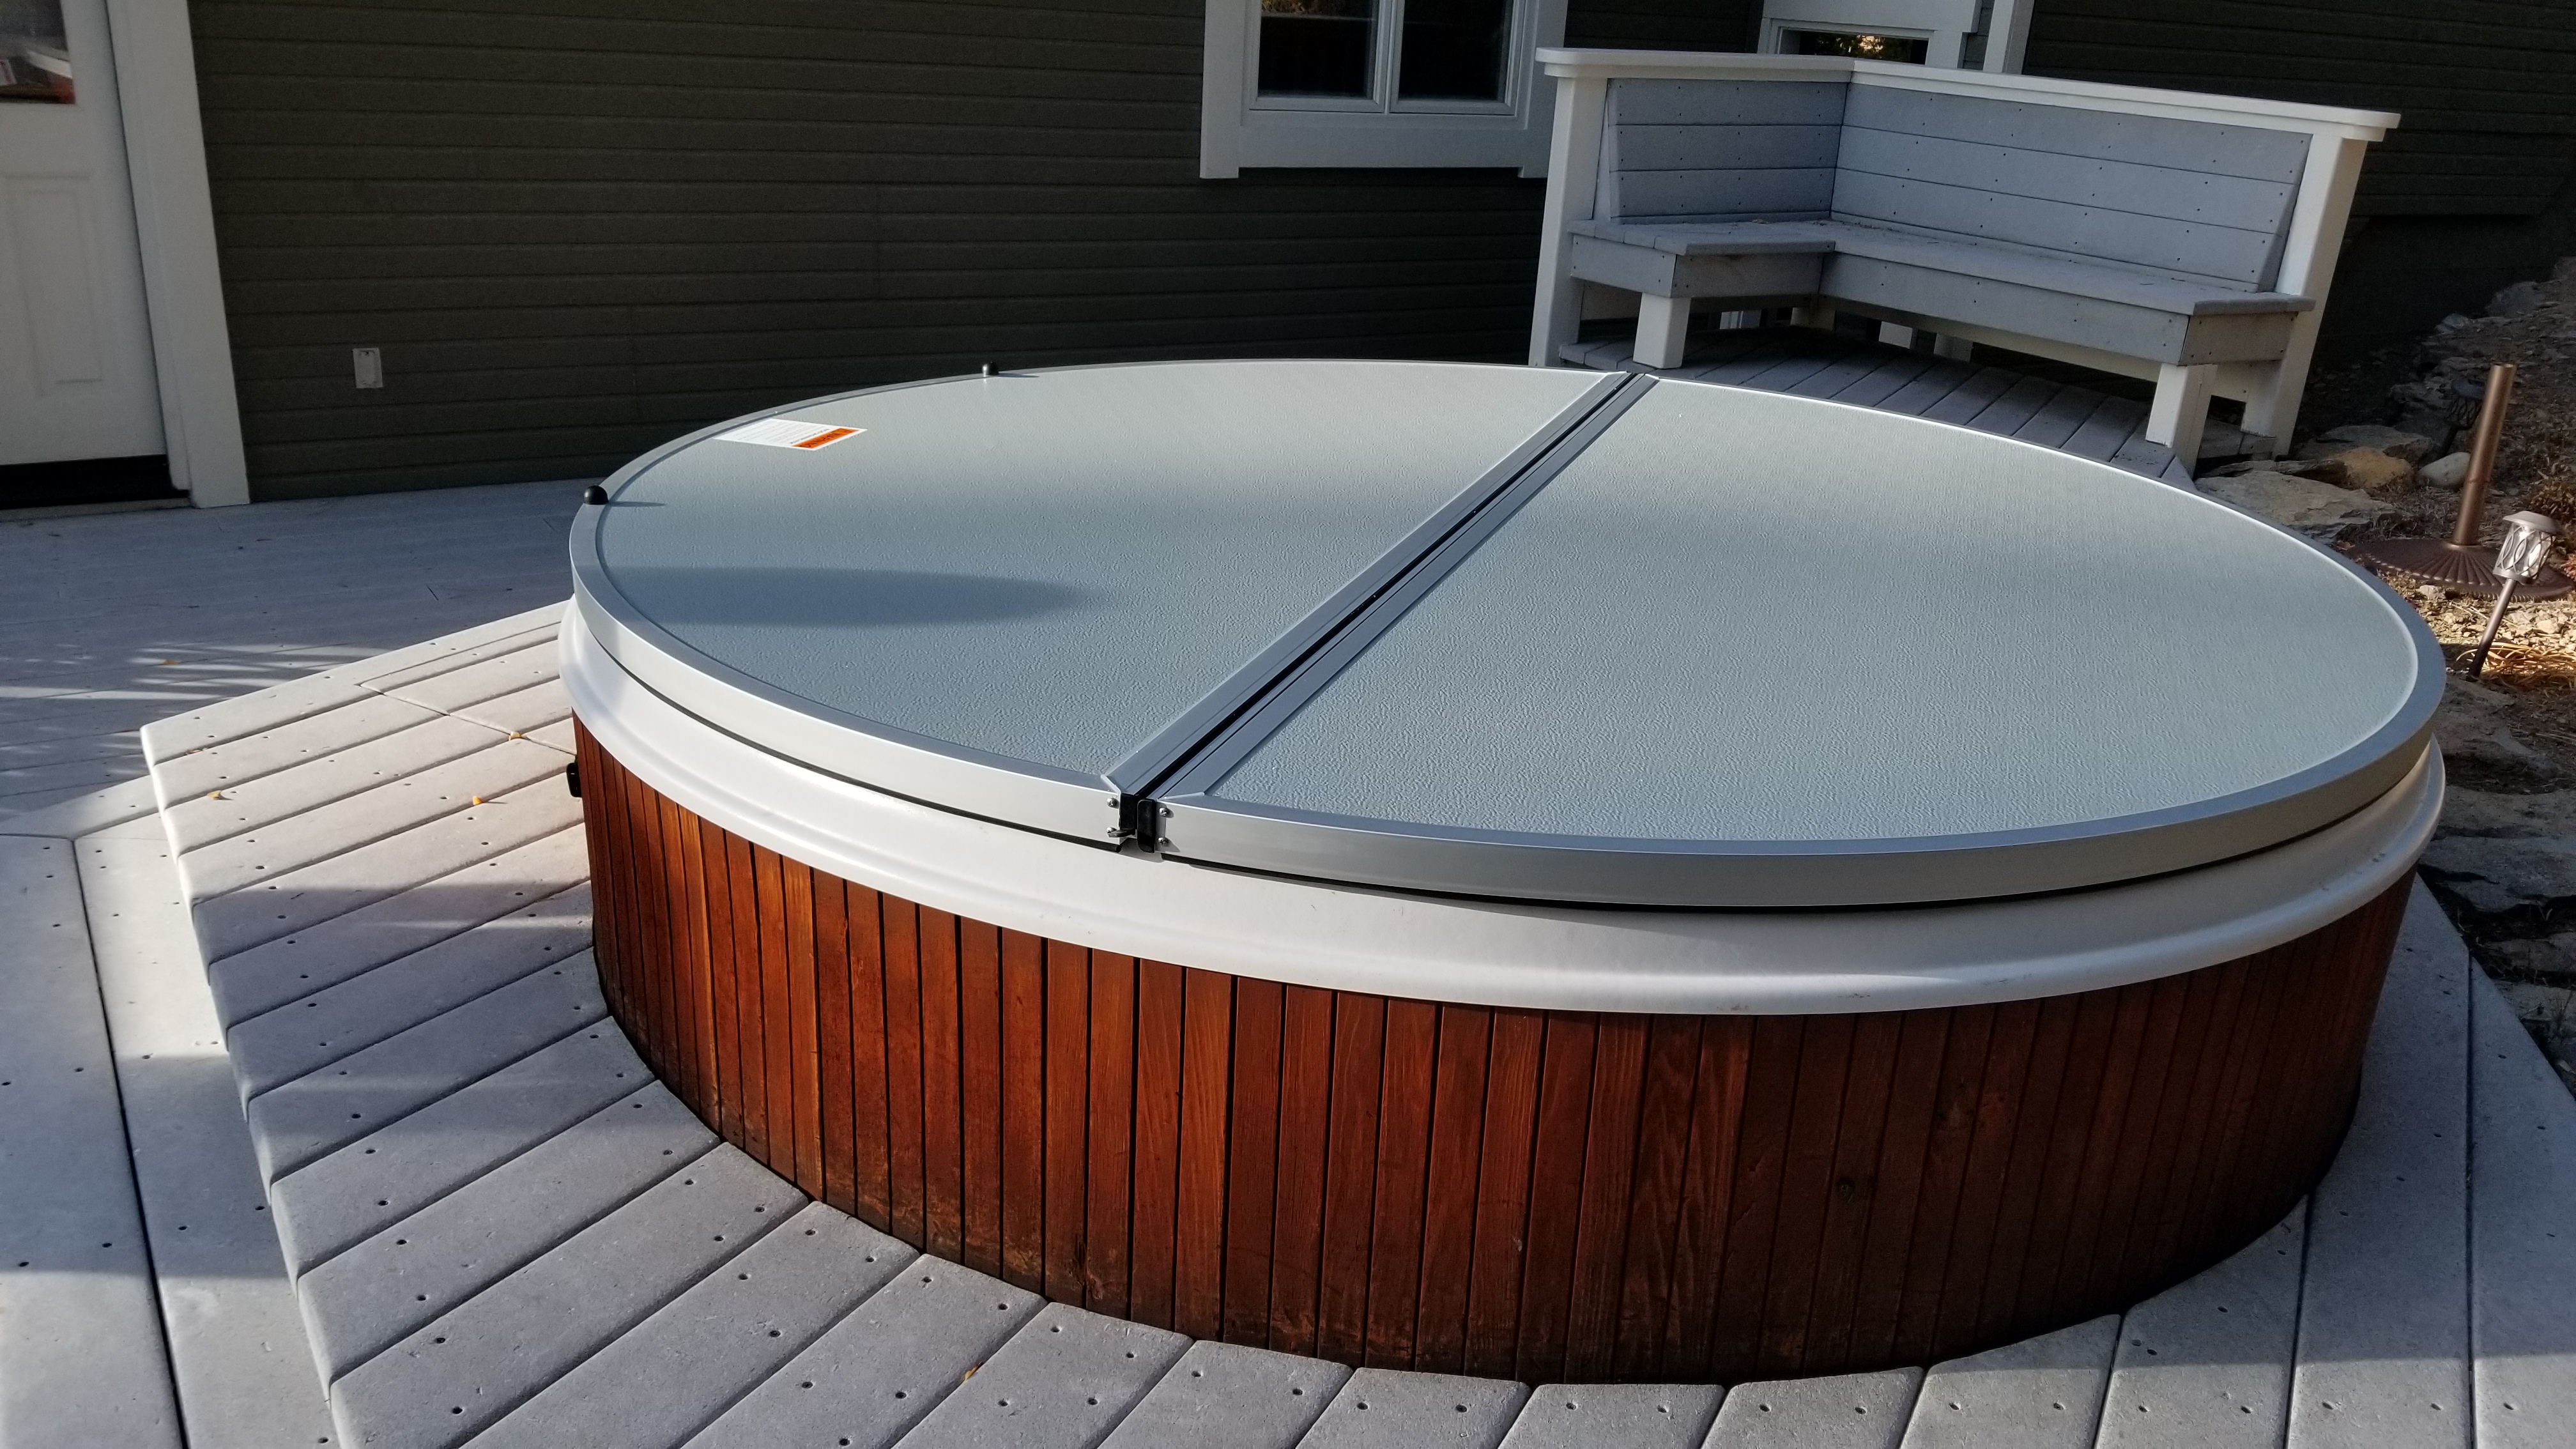 Be Lite Aluminum Spa Covers, Above Ground Spa Covers